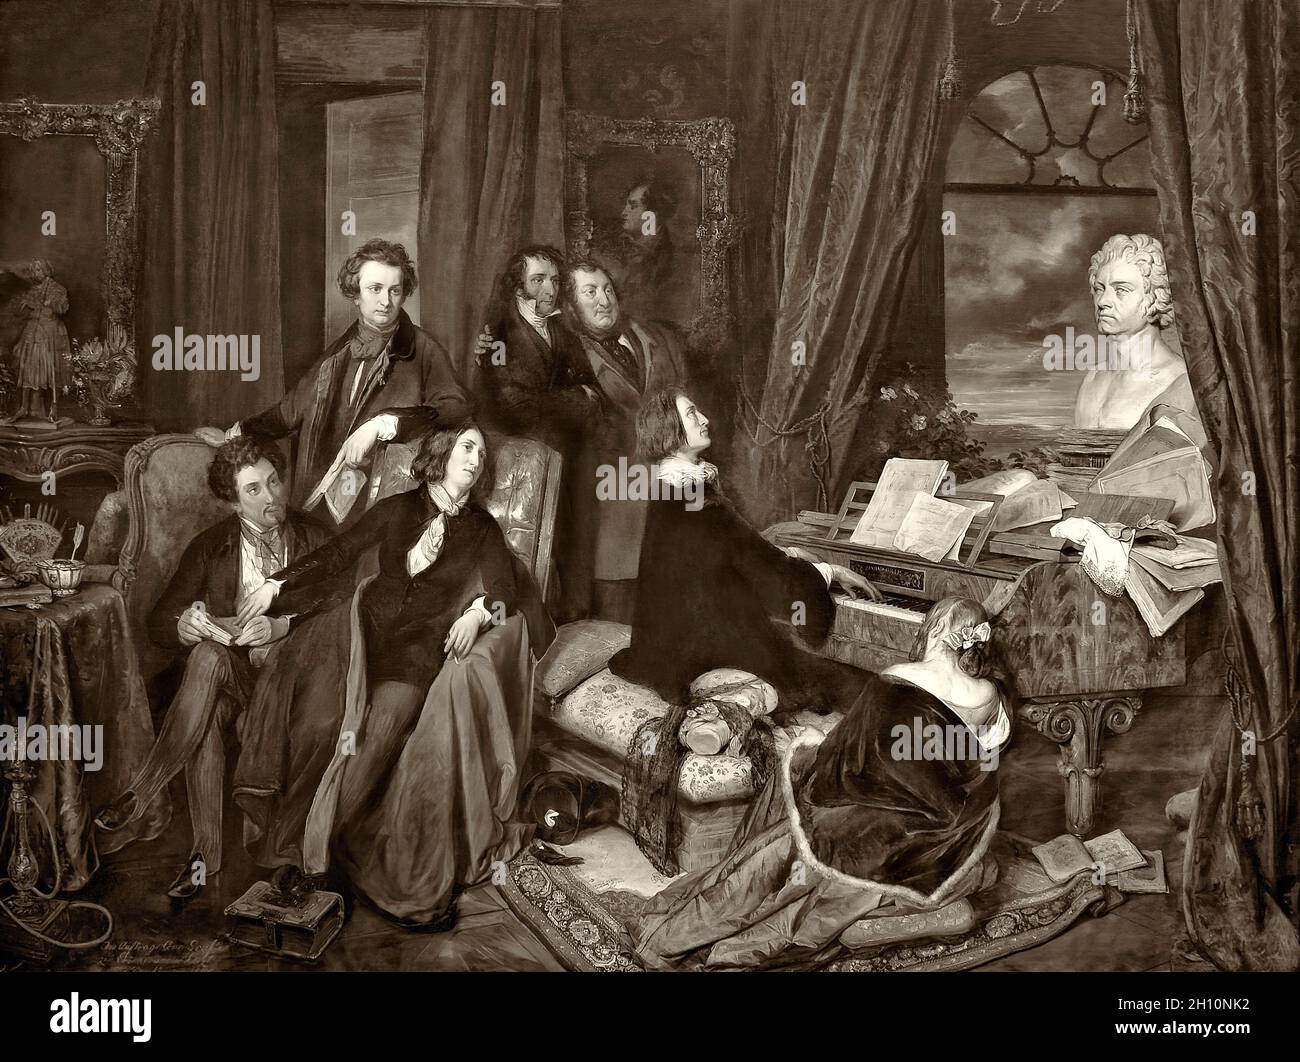 Franz Liszt at the Piano, by Josef Danhauser, 1840, with Alfred de Musset or Alexandre Dumas père, George Sand, Marie d'Agoult, Hector Berlioz or Victor Hugo; Niccolò Paganini, Gioachino Rossini, digitally optimized Stock Photo